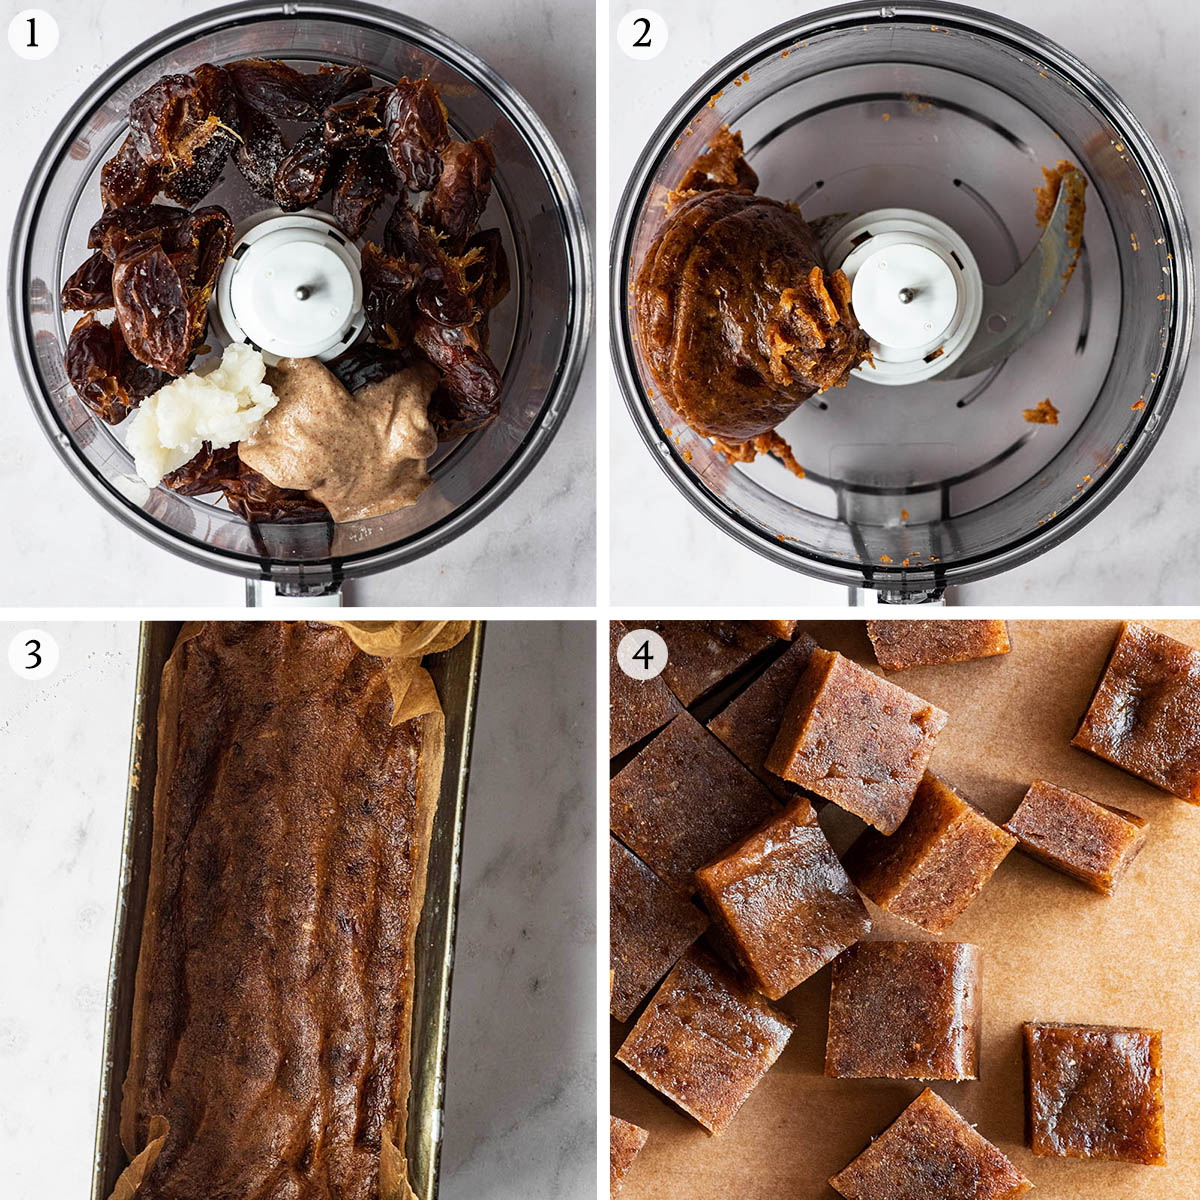 Date caramels steps 1 to 4.